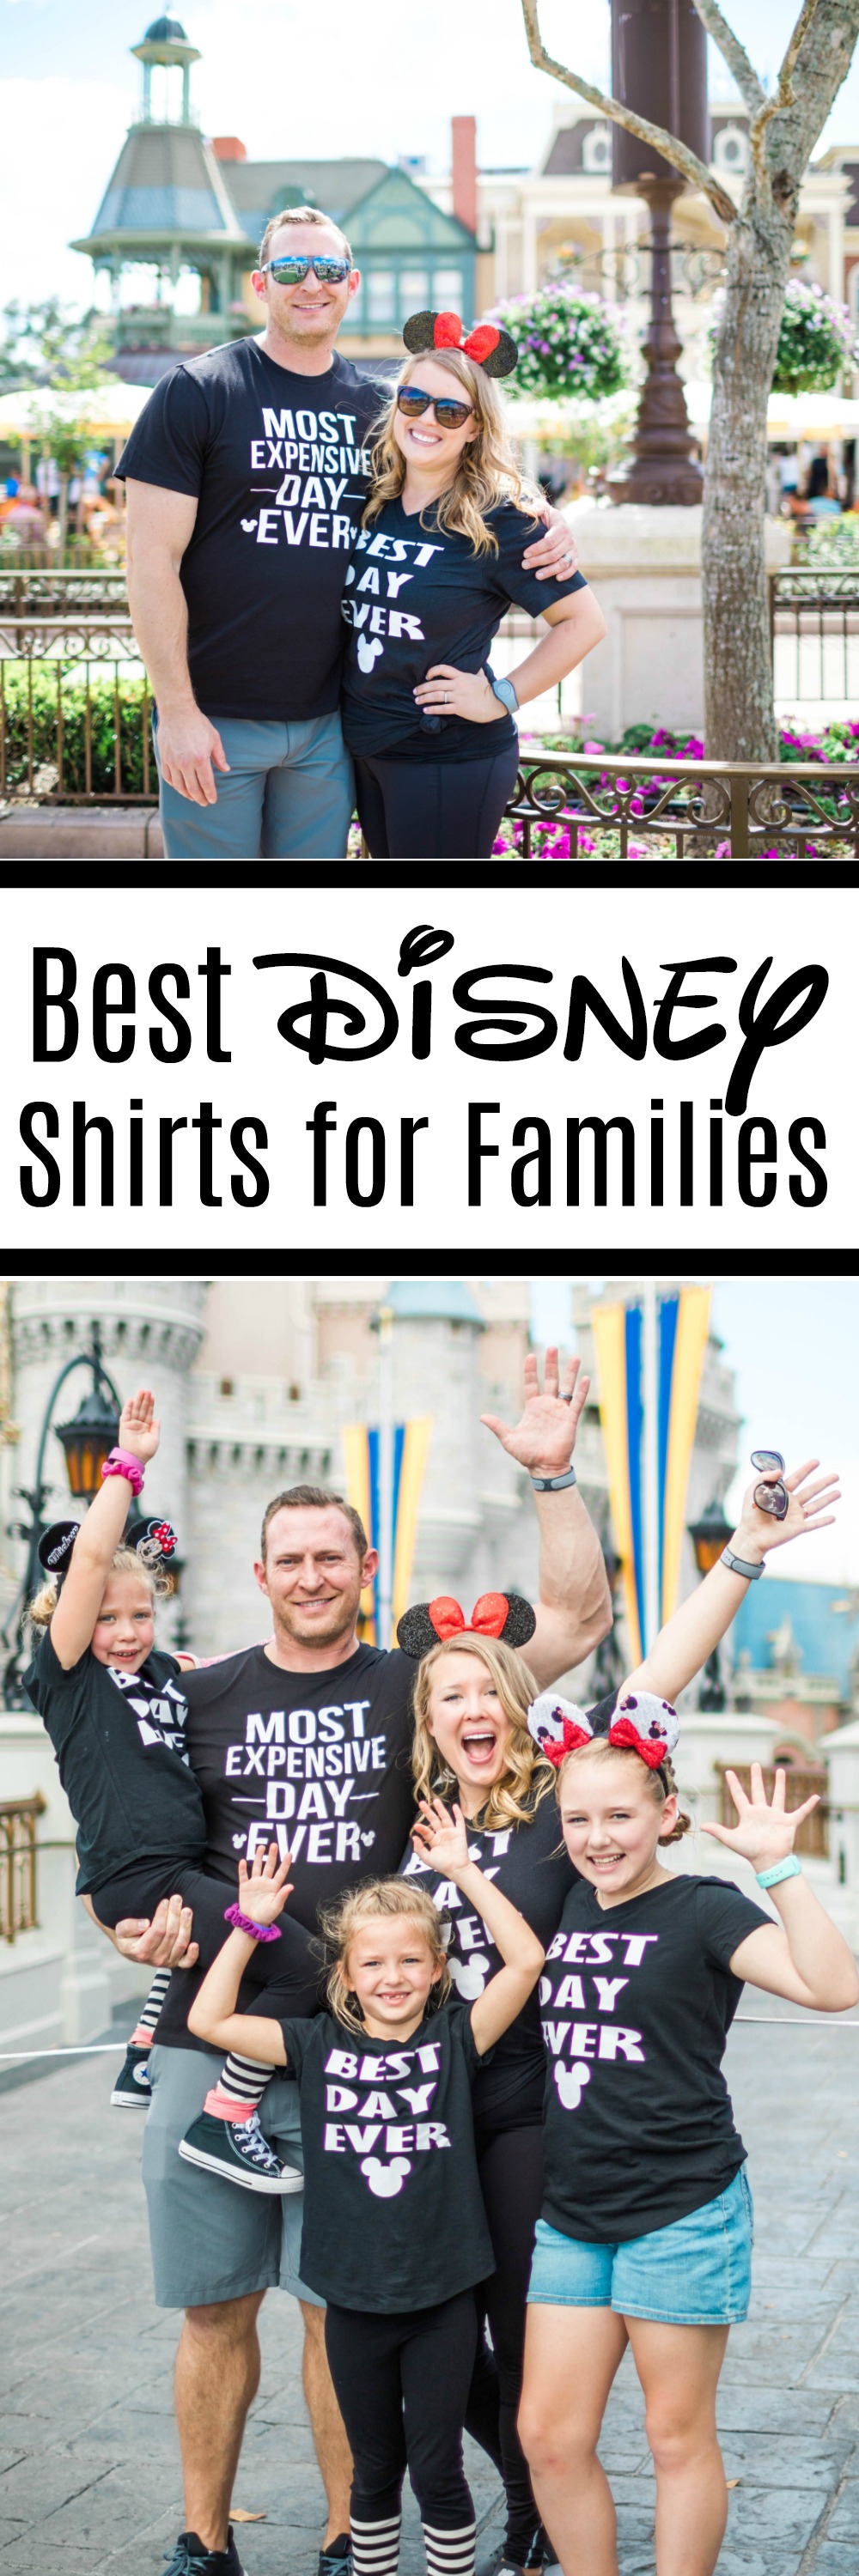 Best Disney Shirts for Families- *Free file for Silhouette and Cricut